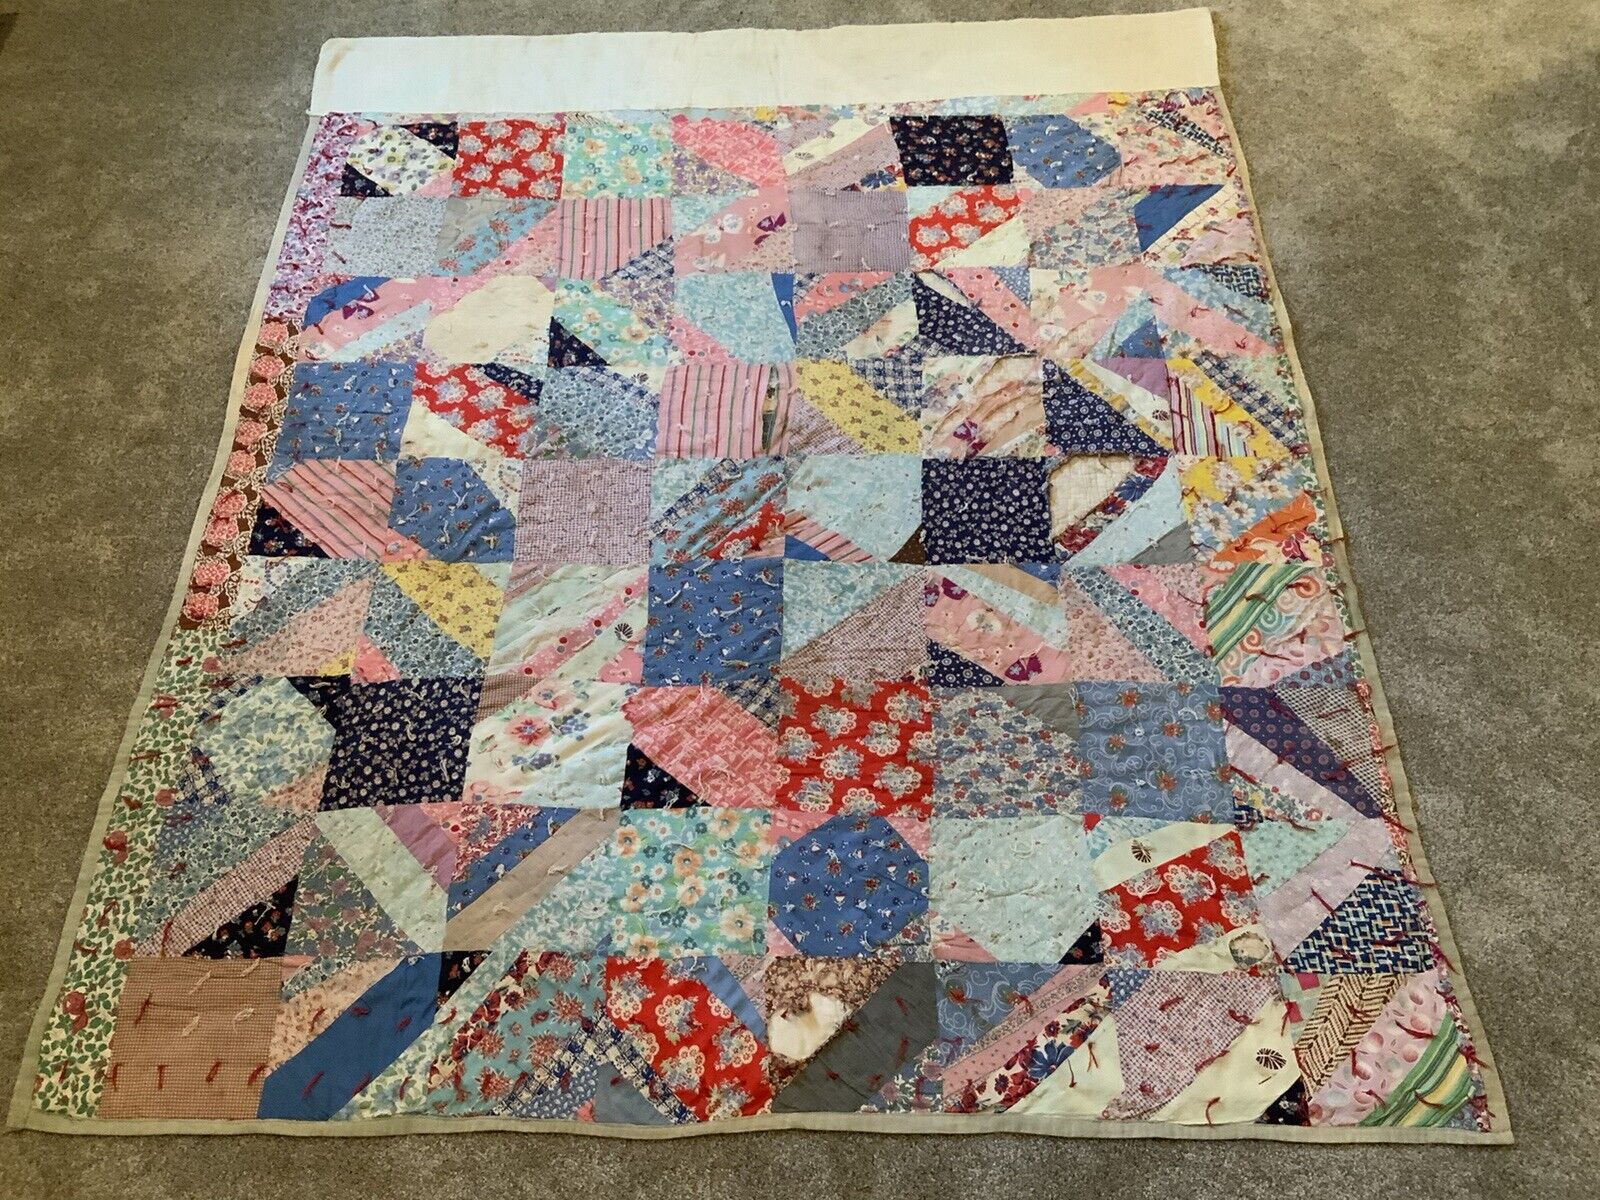 Tattered Torn Old Cotton Patchwork Quilt 80”x 65” Machine Stitched Hand Quilted